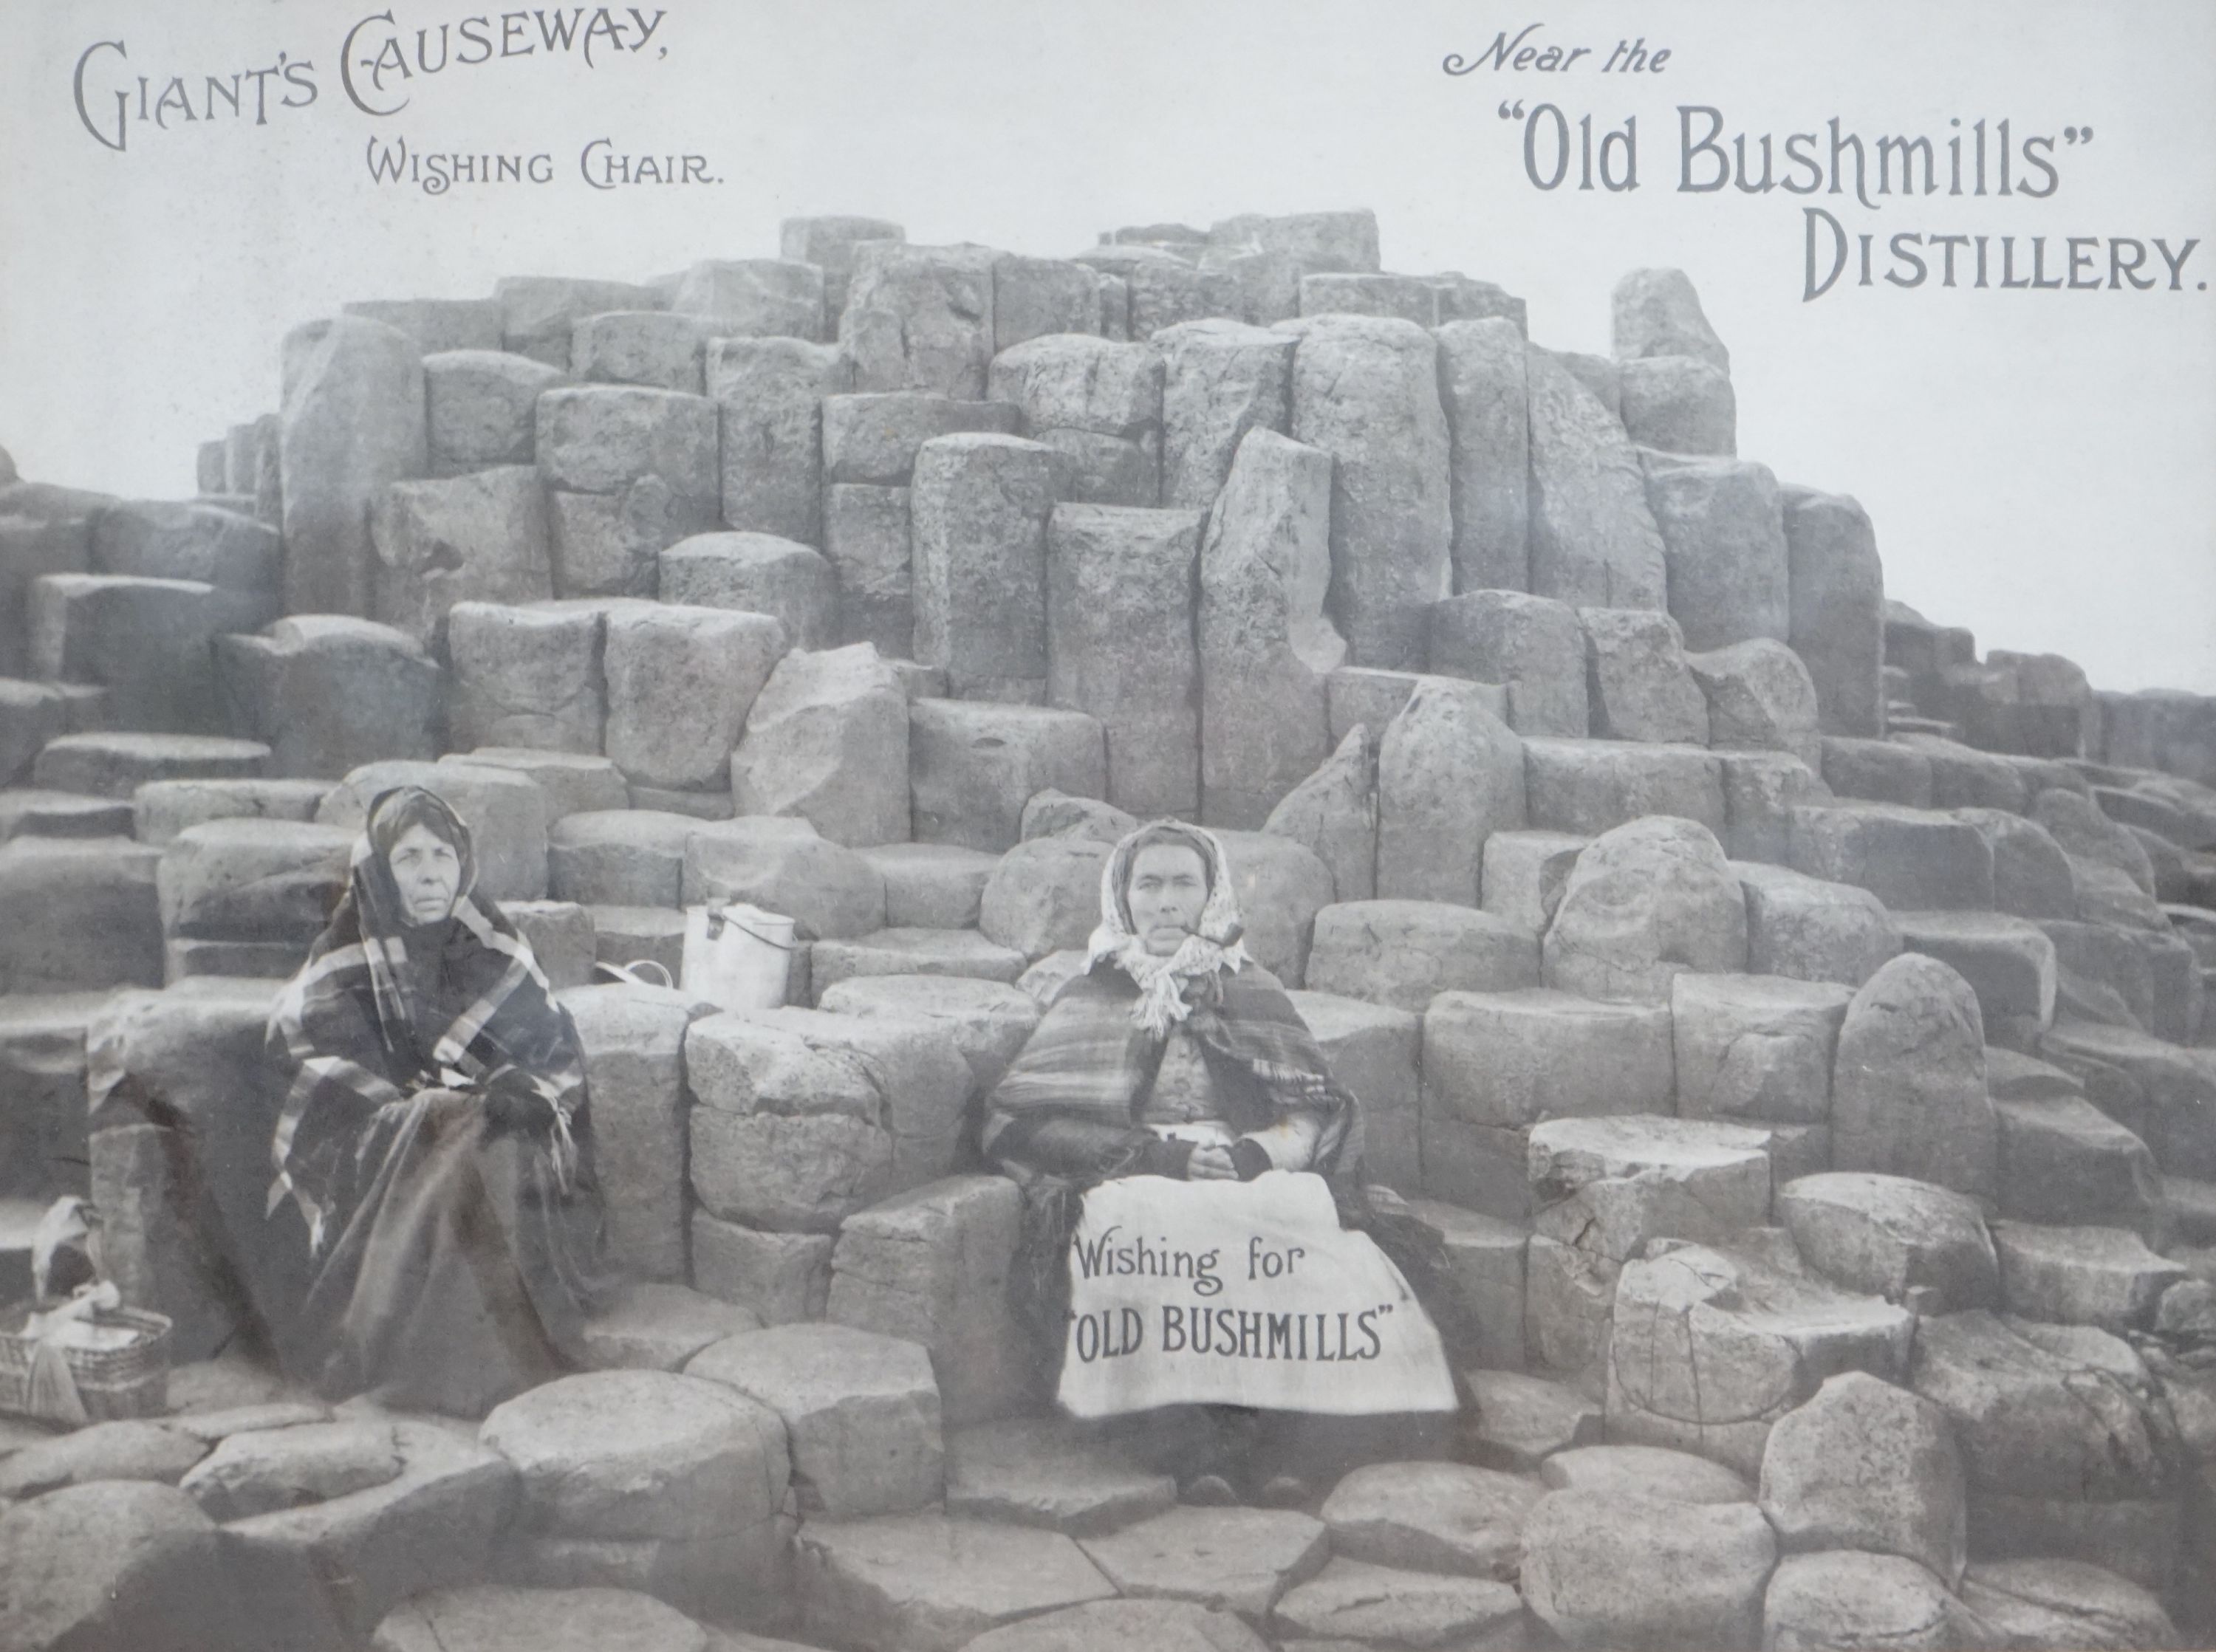 A monochrome advertising print for Old Bushmills Distillery, Giants Causeway, Wishing Chair, 39 x